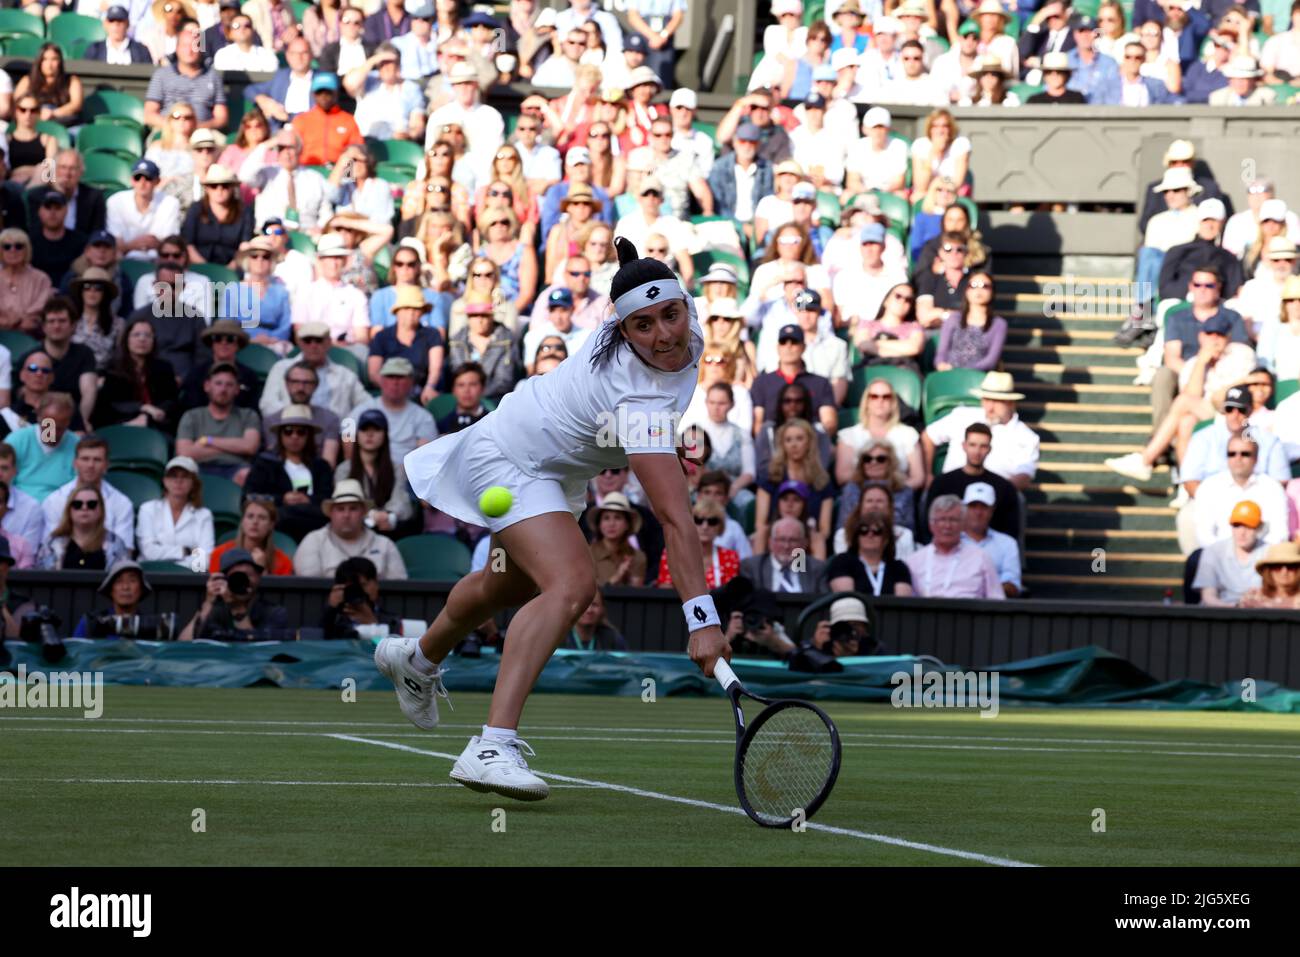 5 July 2022, All England Lawn Tennis Club, Wimbledon, London, United Kingdom:  Tunisia's Ons Jabeur scoops up a backhand half volley to Marie Bouzkova of the Czech Republic during their quarterfinal match at Wimbledon today.  Jabeur won the match to advance to the semi finals. Stock Photo